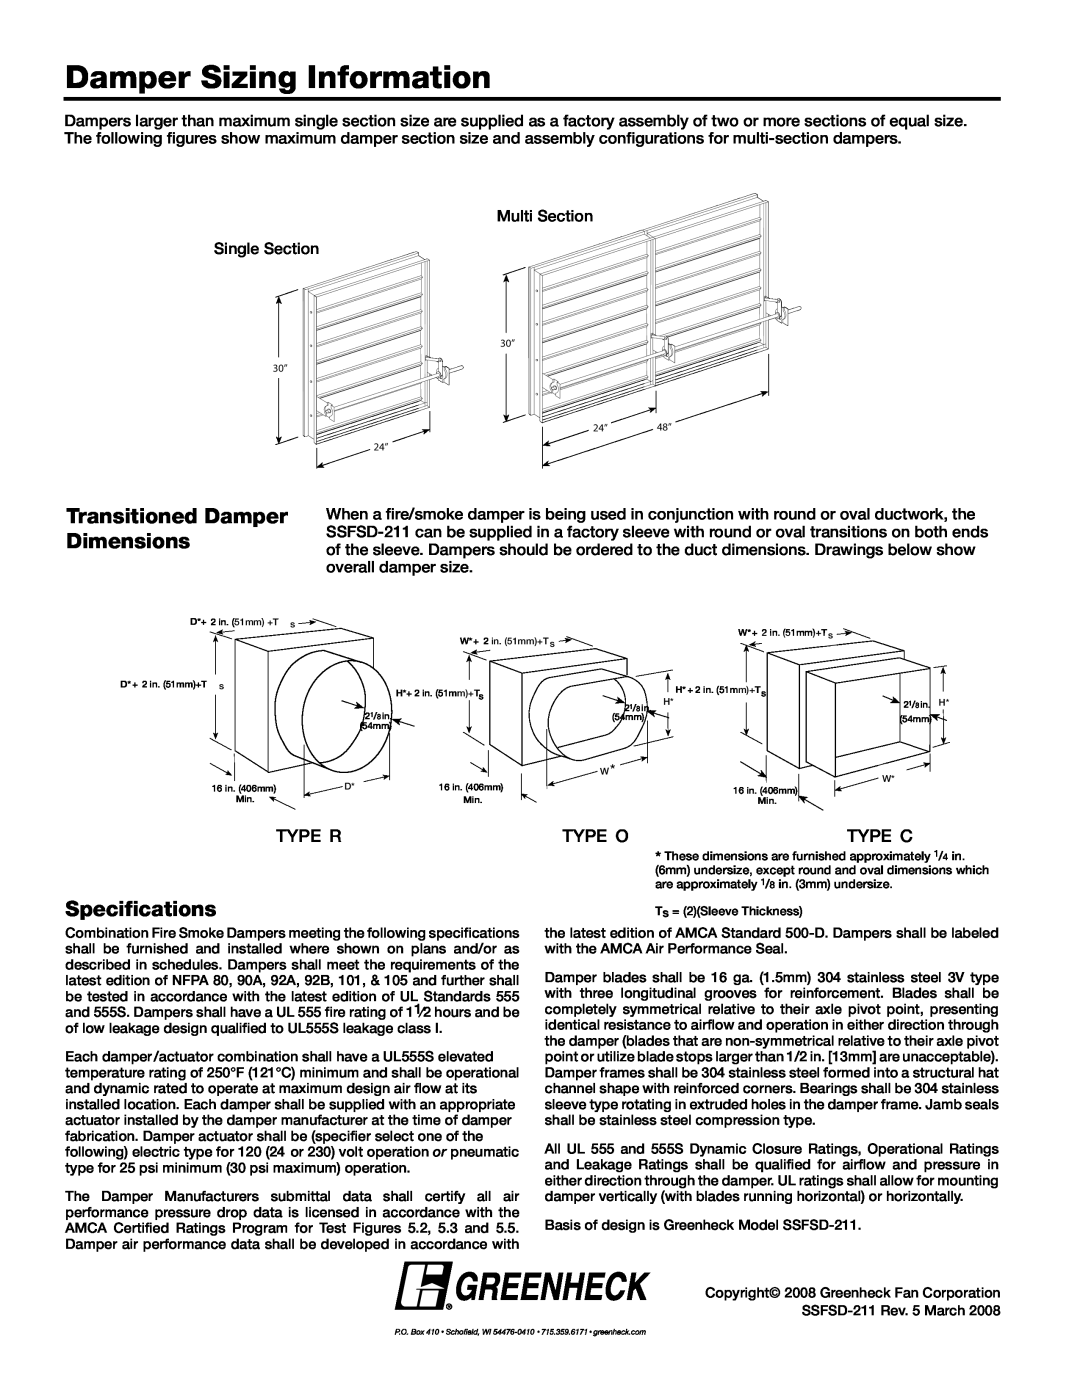 Greenheck Fan SSFSD-211 dimensions Damper Sizing Information, Transitioned Damper Dimensions, Specifications 